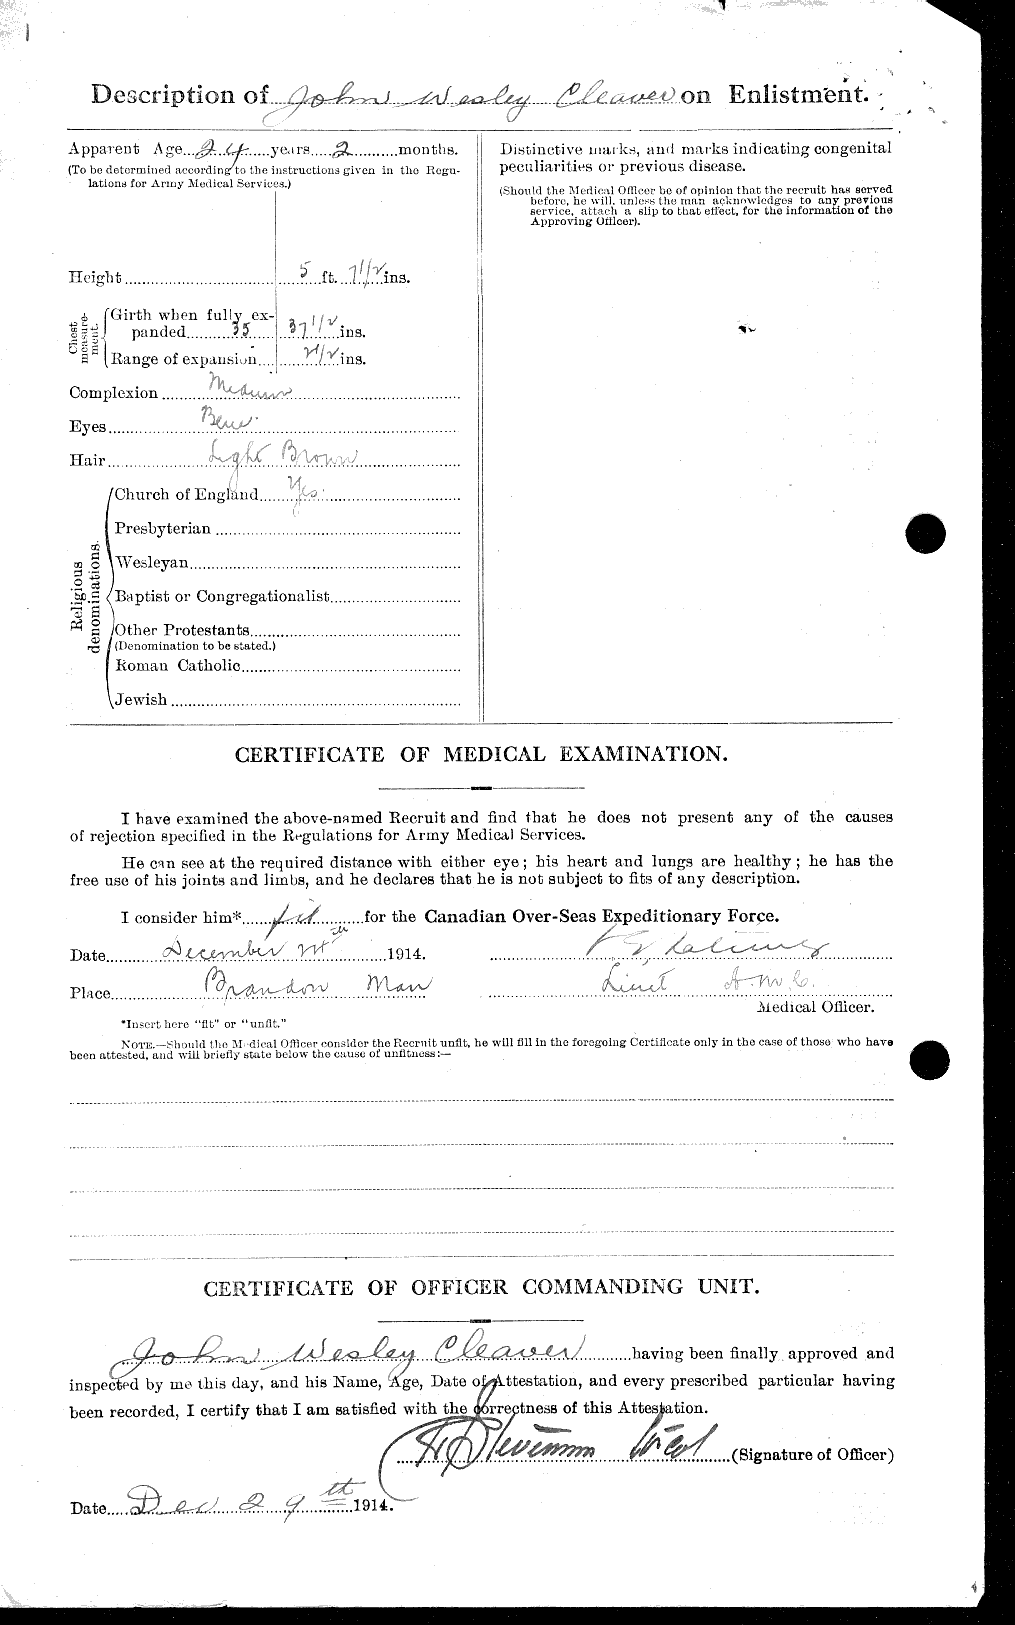 Personnel Records of the First World War - CEF 019366b